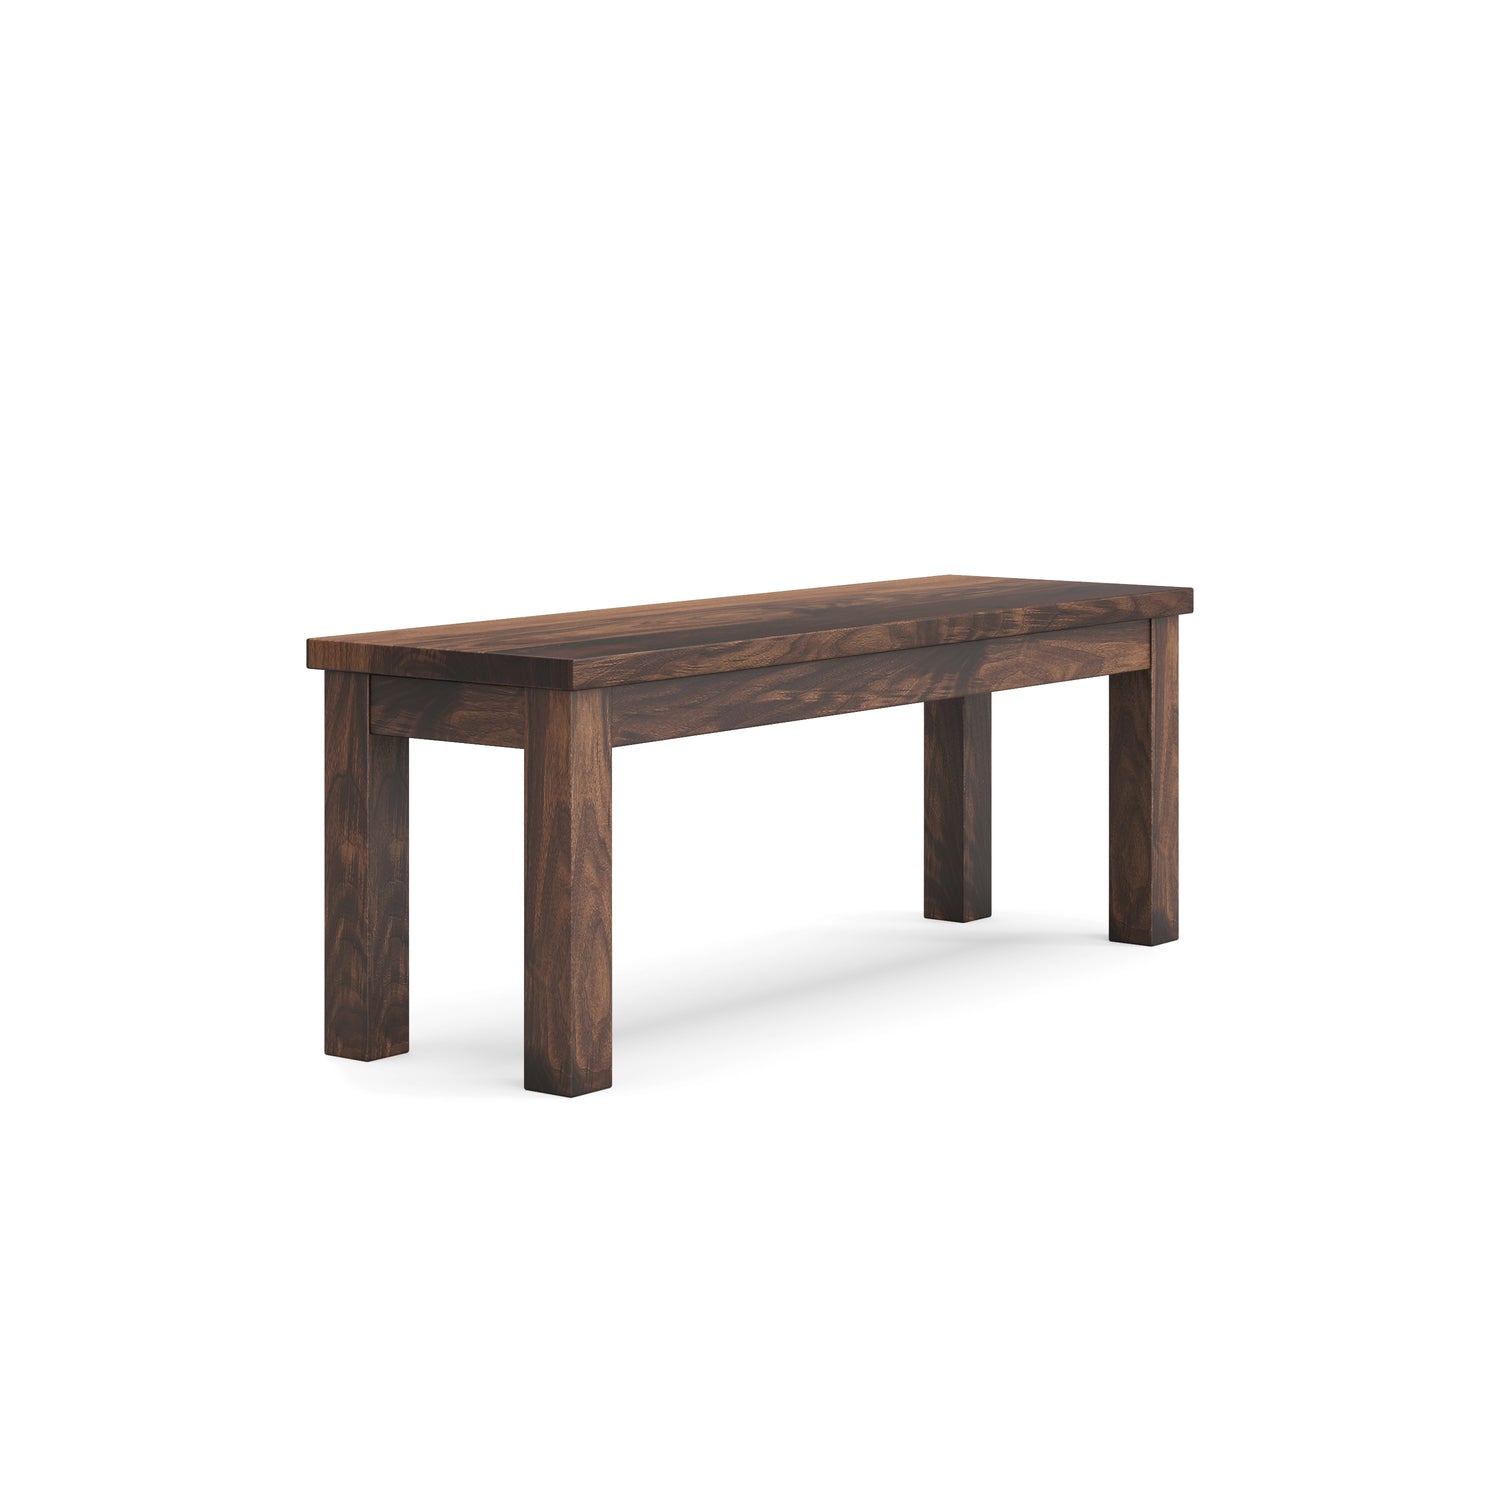 Classic solid wood bench